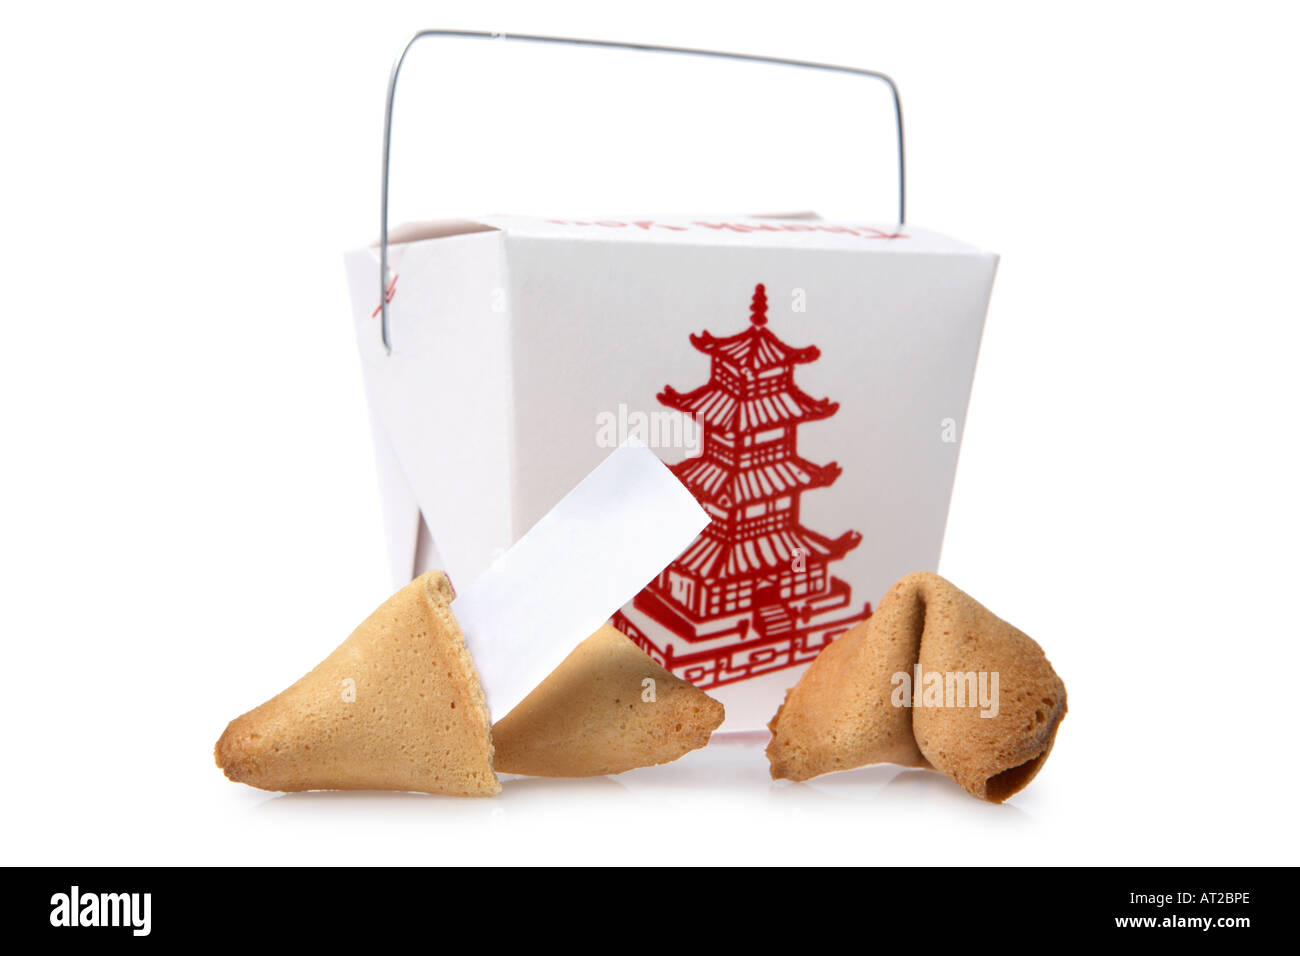 Fortune Cookies chinois et emporter fort Banque D'Images